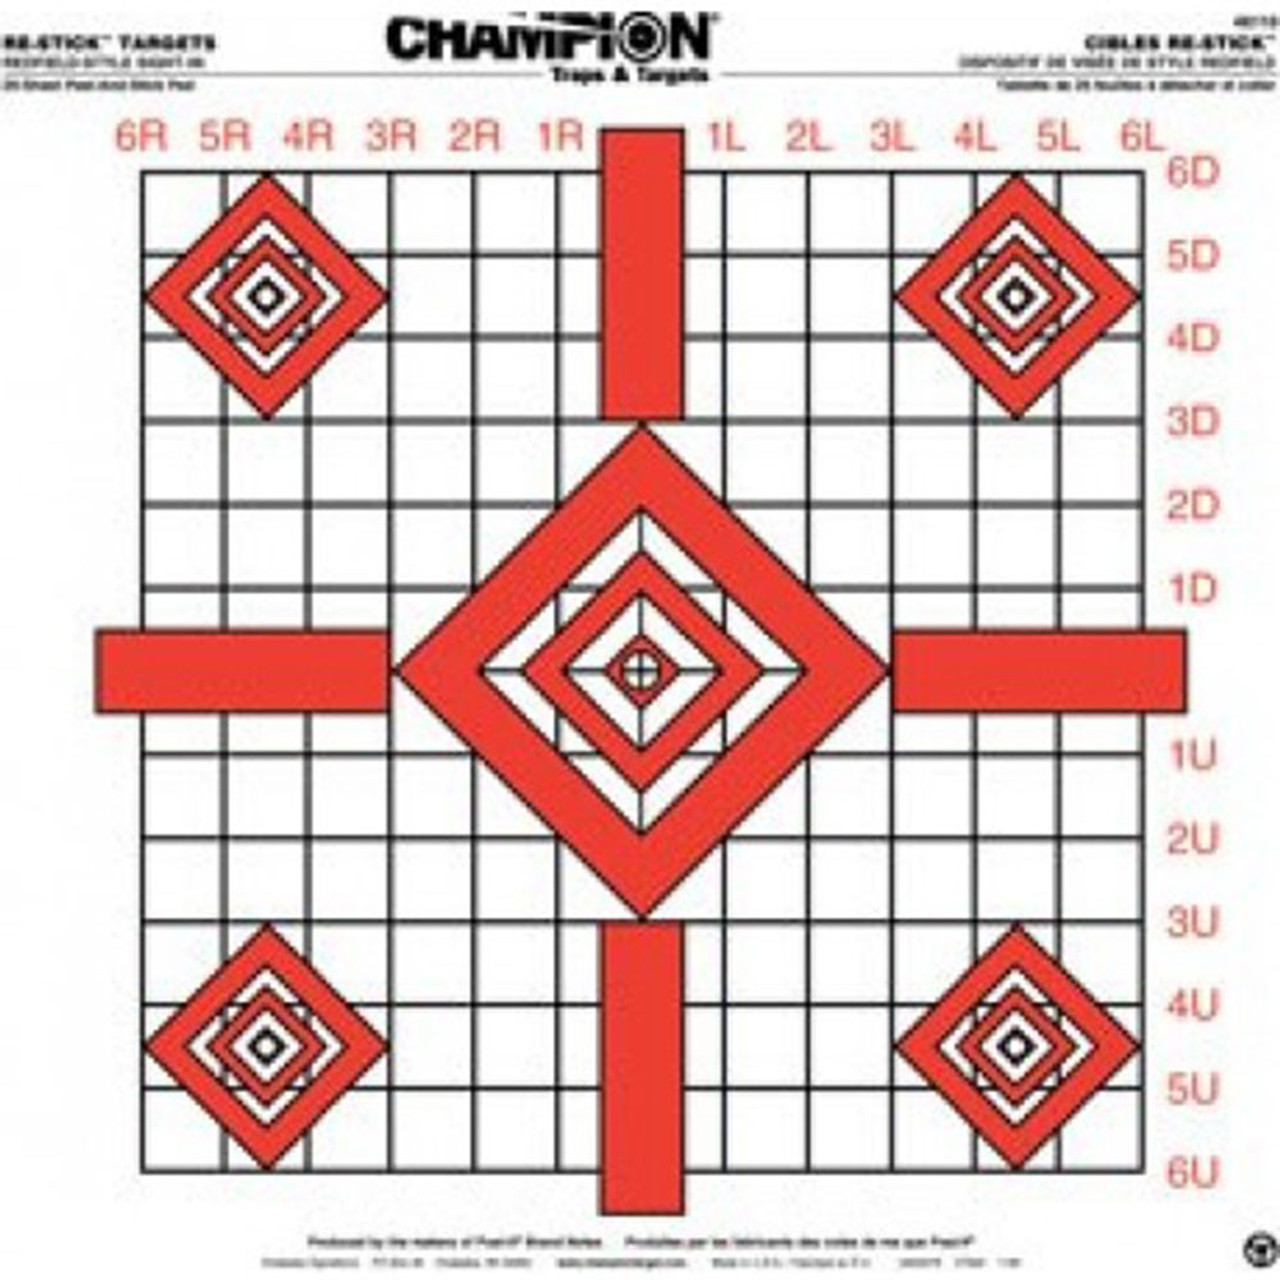 Isse Konsulat Maxim Champion Target Re-Stick Redfield-Style Precision Sight-In Target -  Atlantic Tactical Inc